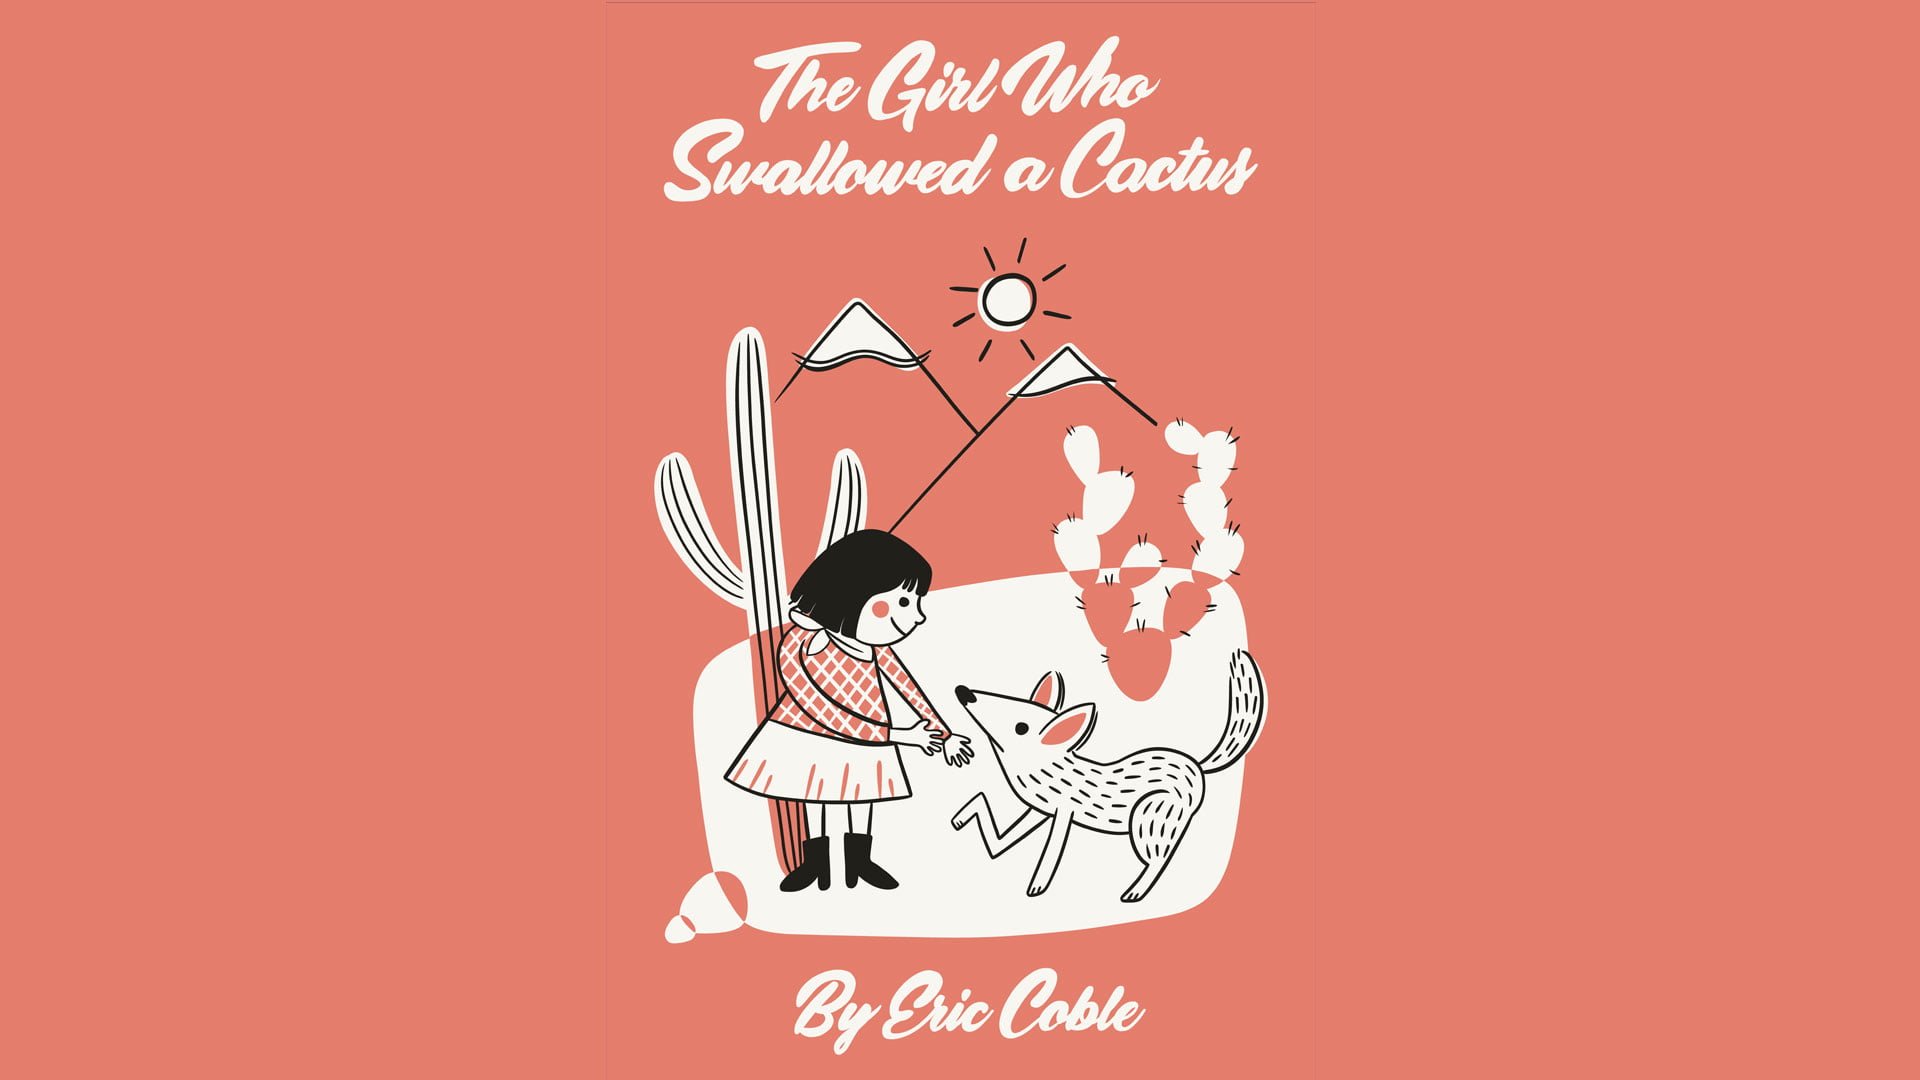 The girl who swallowed a cactus